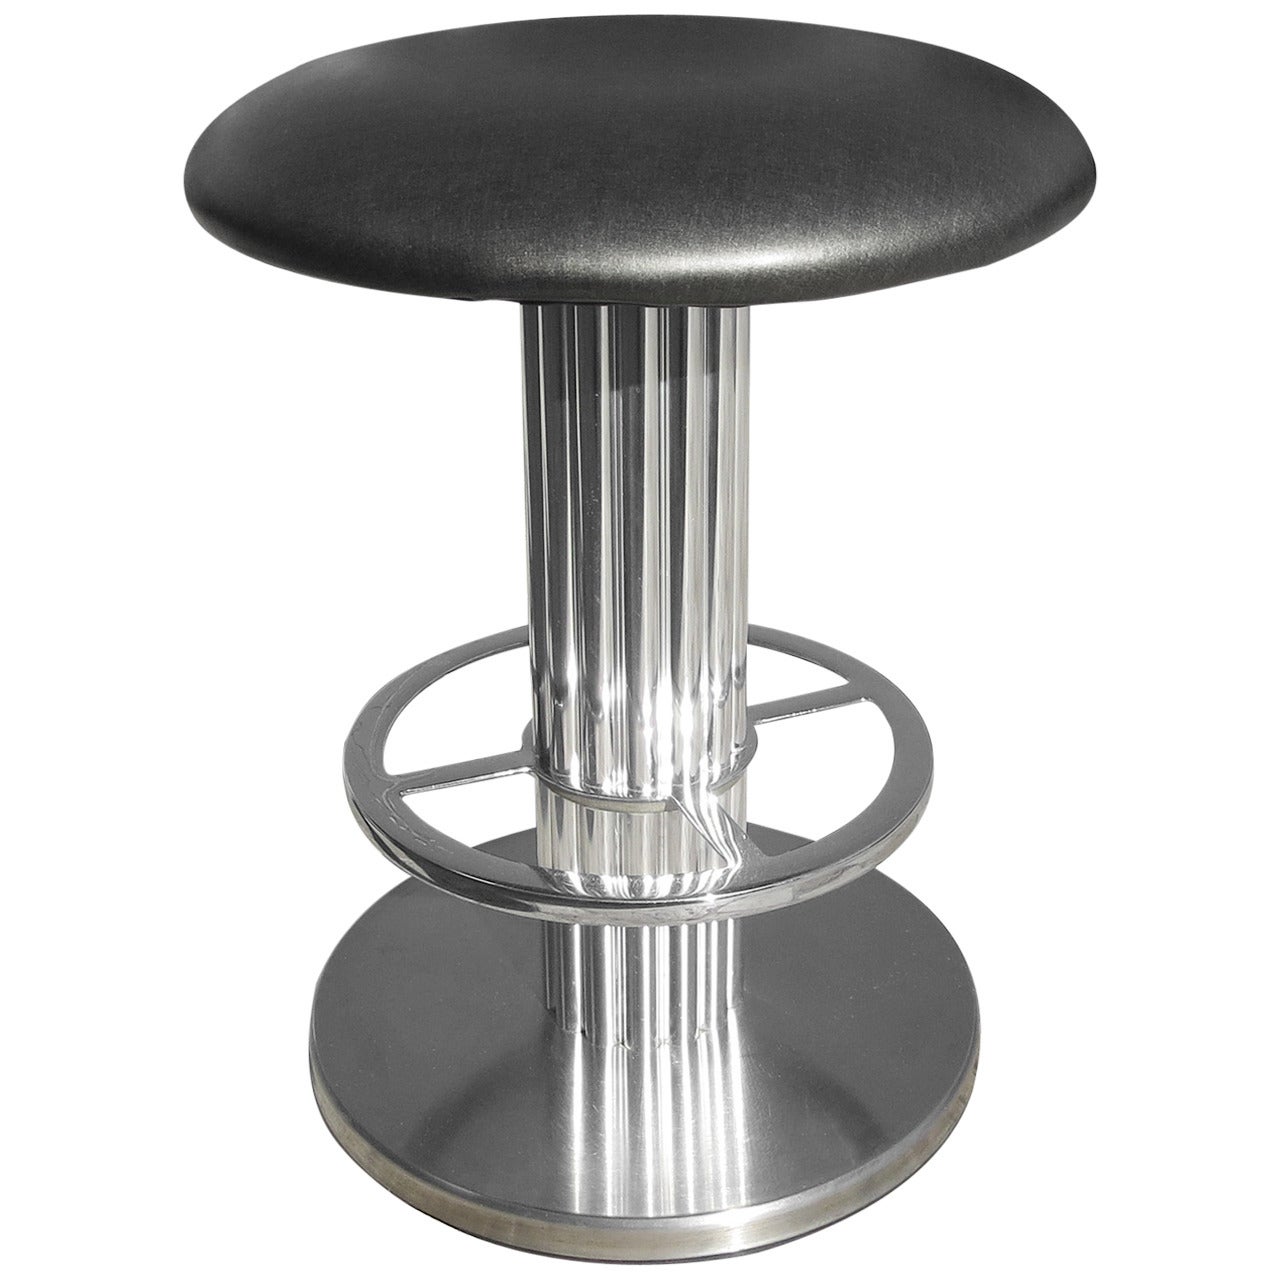 Machine Age Barstools by Design for Leisure